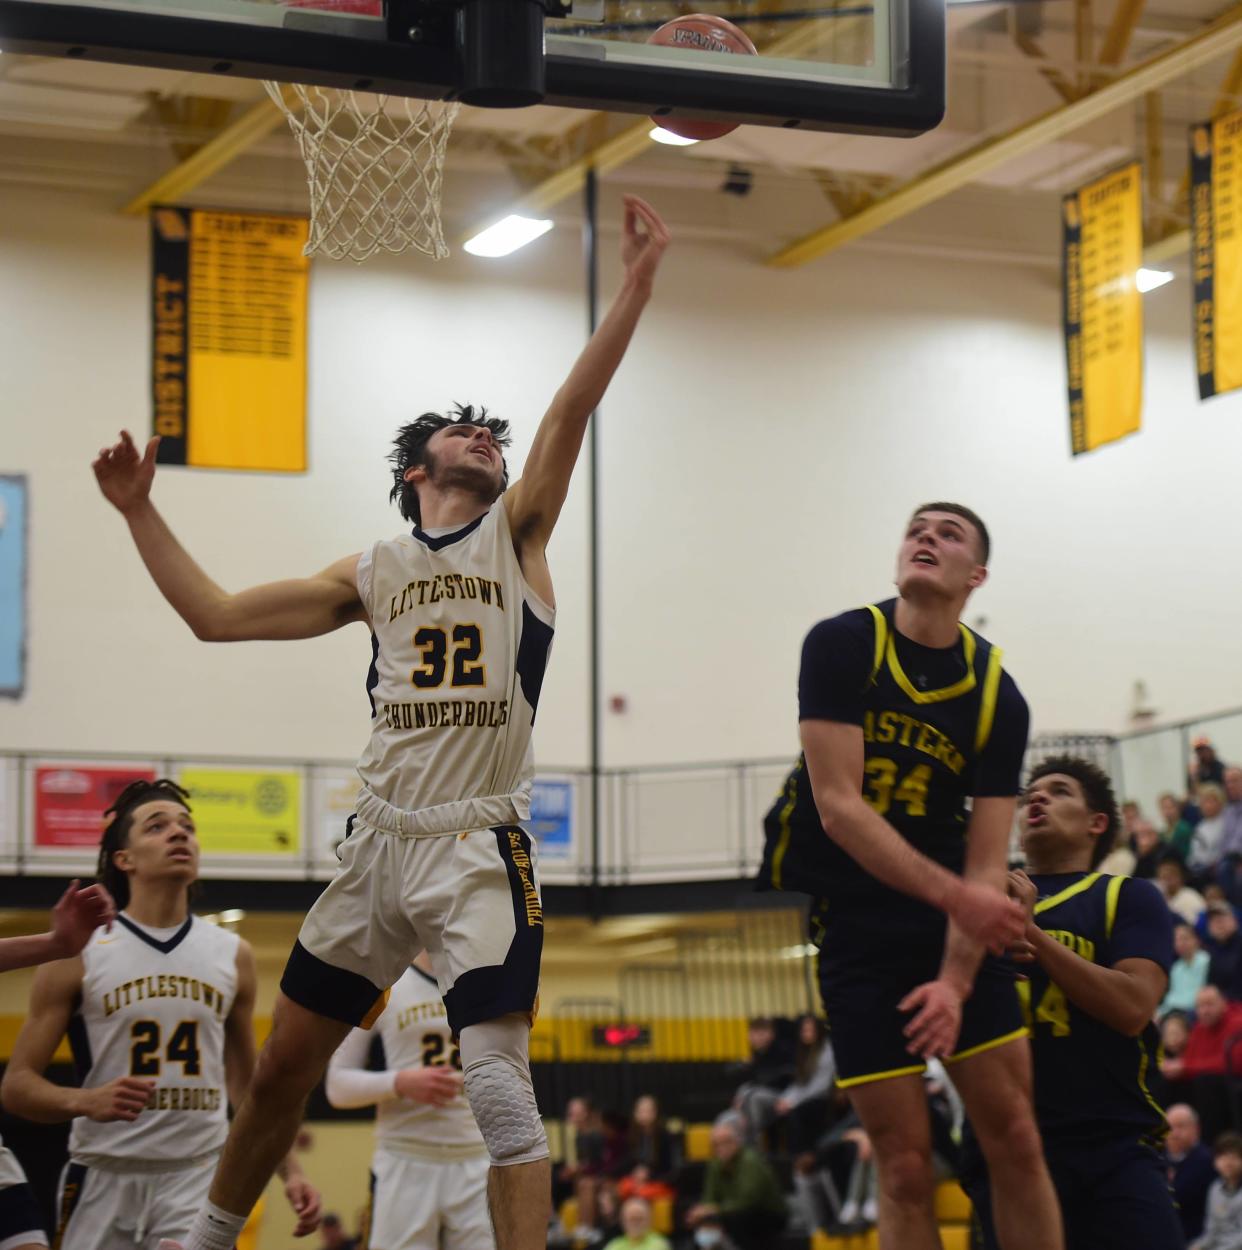 Littlestown's Zyan Herr goes up for a layup over Eastern York's Carter Wamsley Friday. Eastern York beat Littlestown, 57-49, in the YAIAA boys' basketball quarterfinals at Red Lion High School, Friday, Feb. 11, 2023.